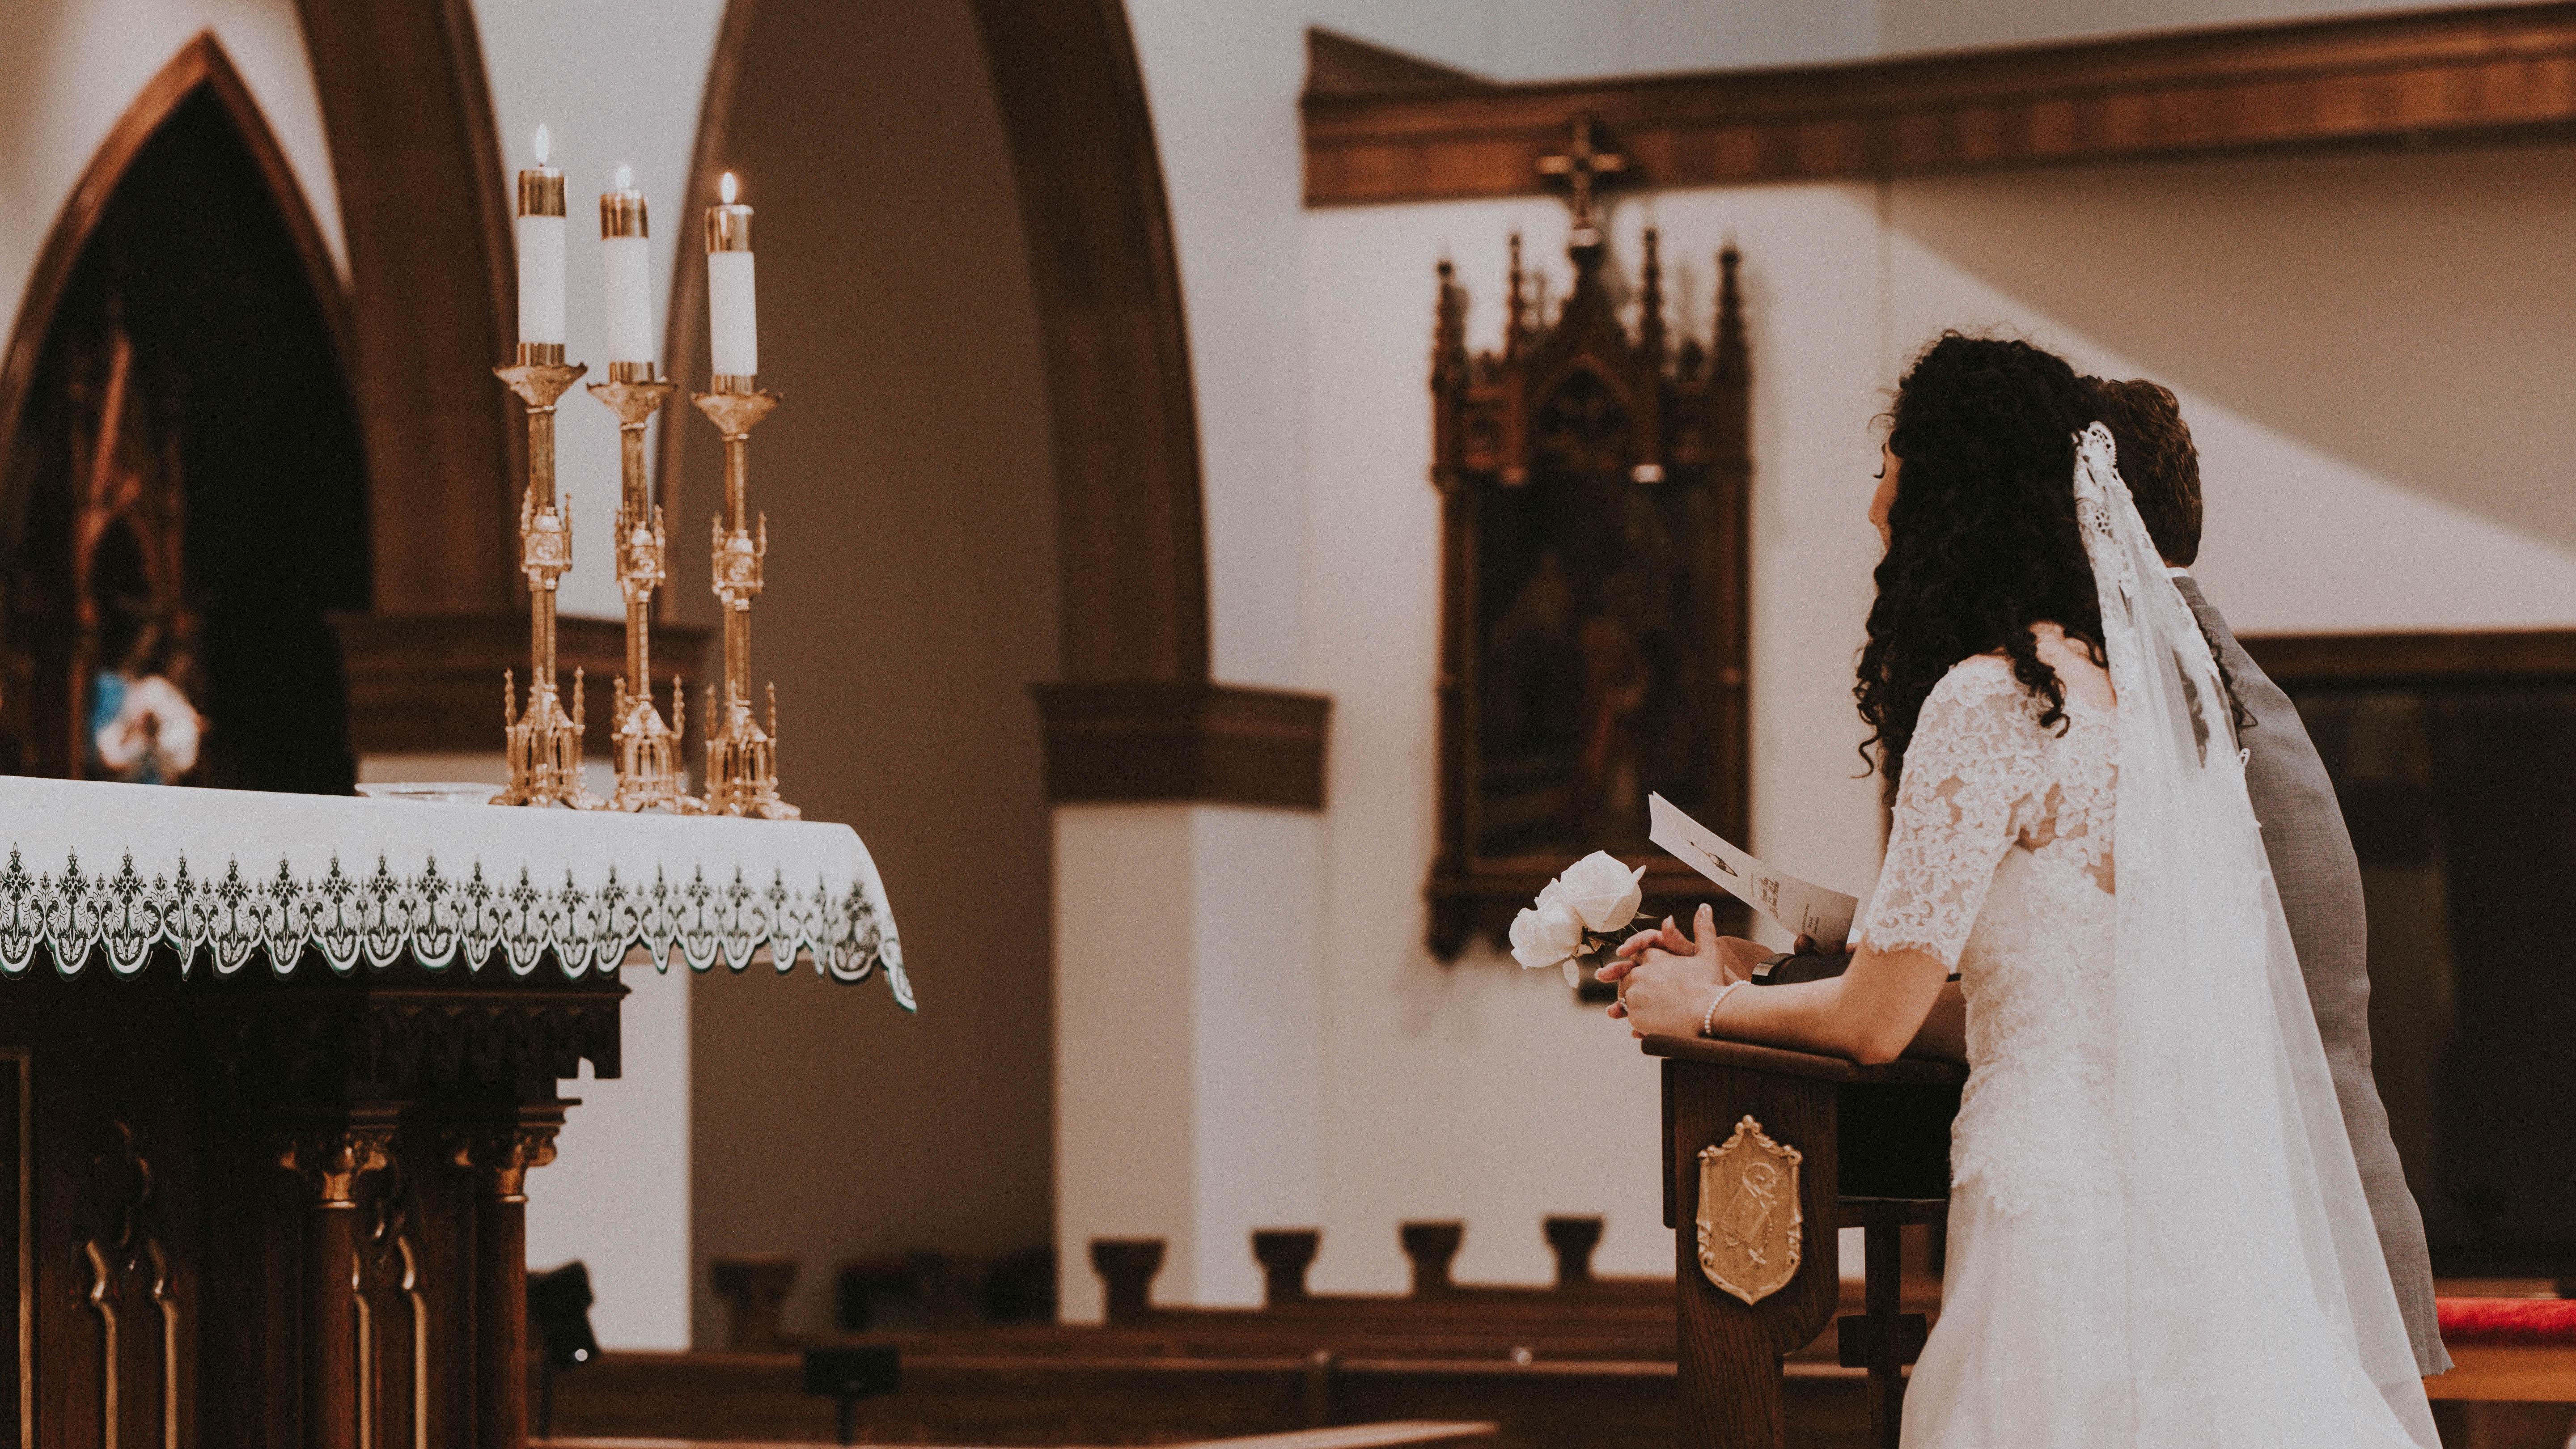 Couple kneeling at the altar at their wedding